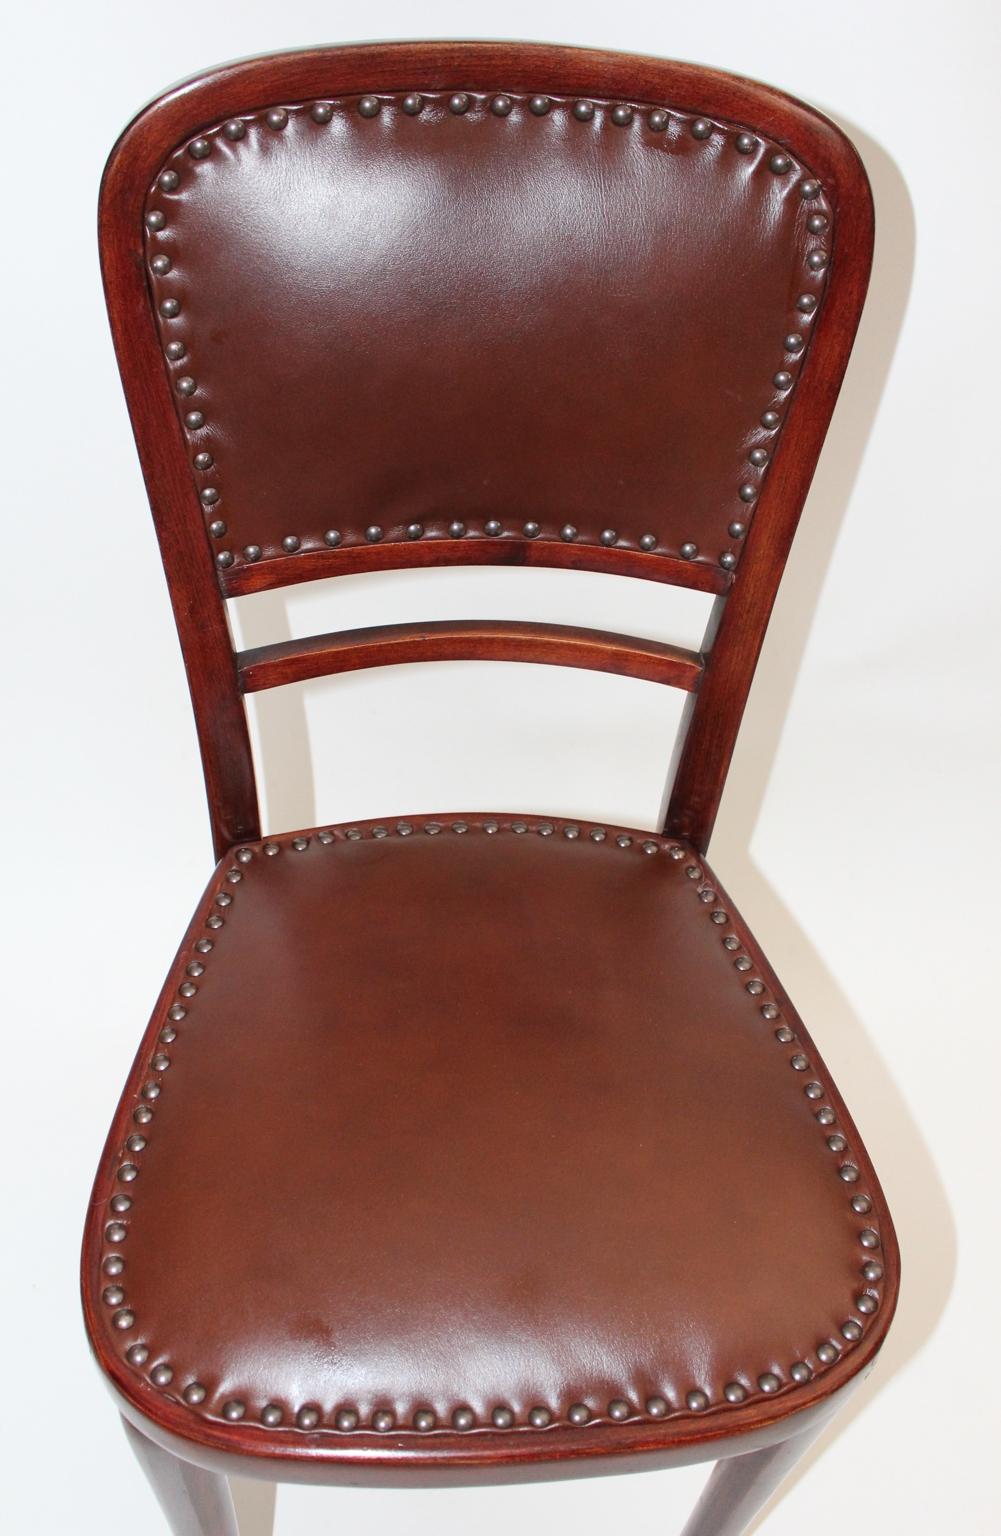 Early 20th Century Jugendstil Vintage Beech and Leather Chair Kat. Nr. 491 by Thonet, circa 1904